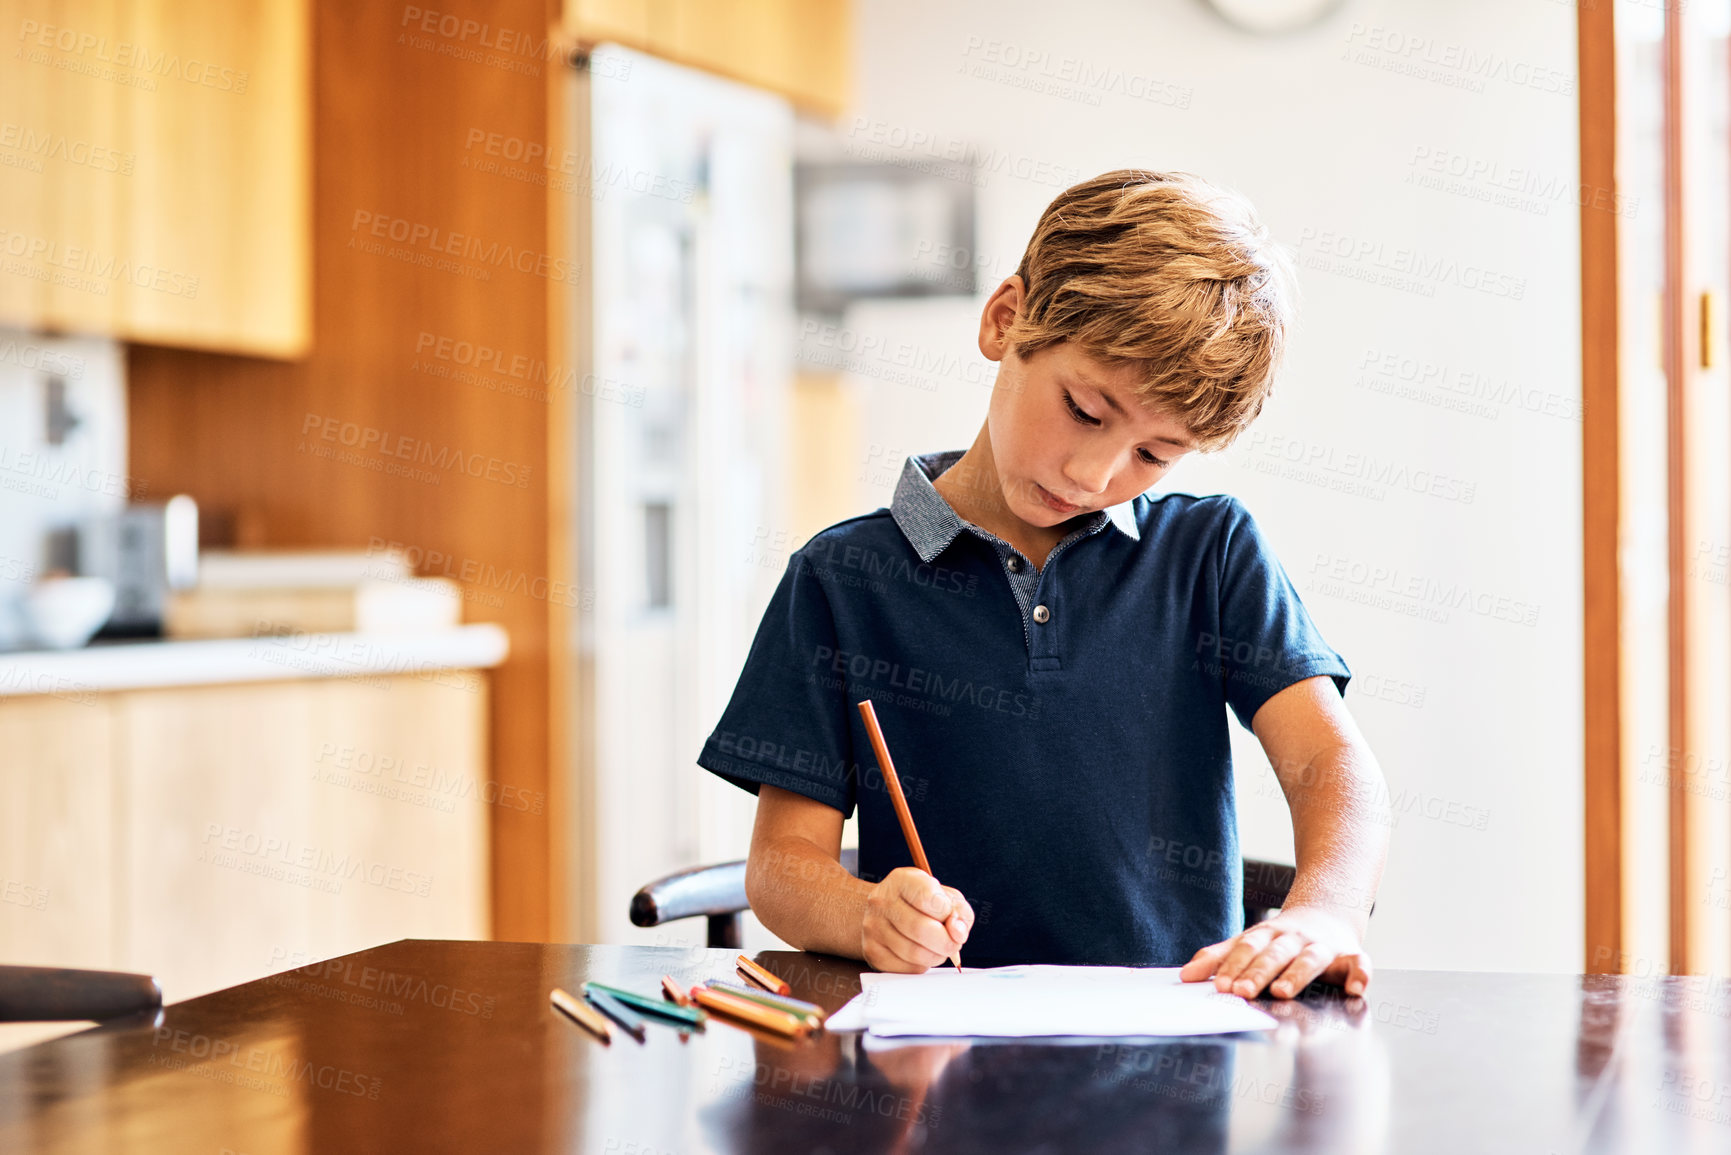 Buy stock photo Shot of a young boy doing his homework